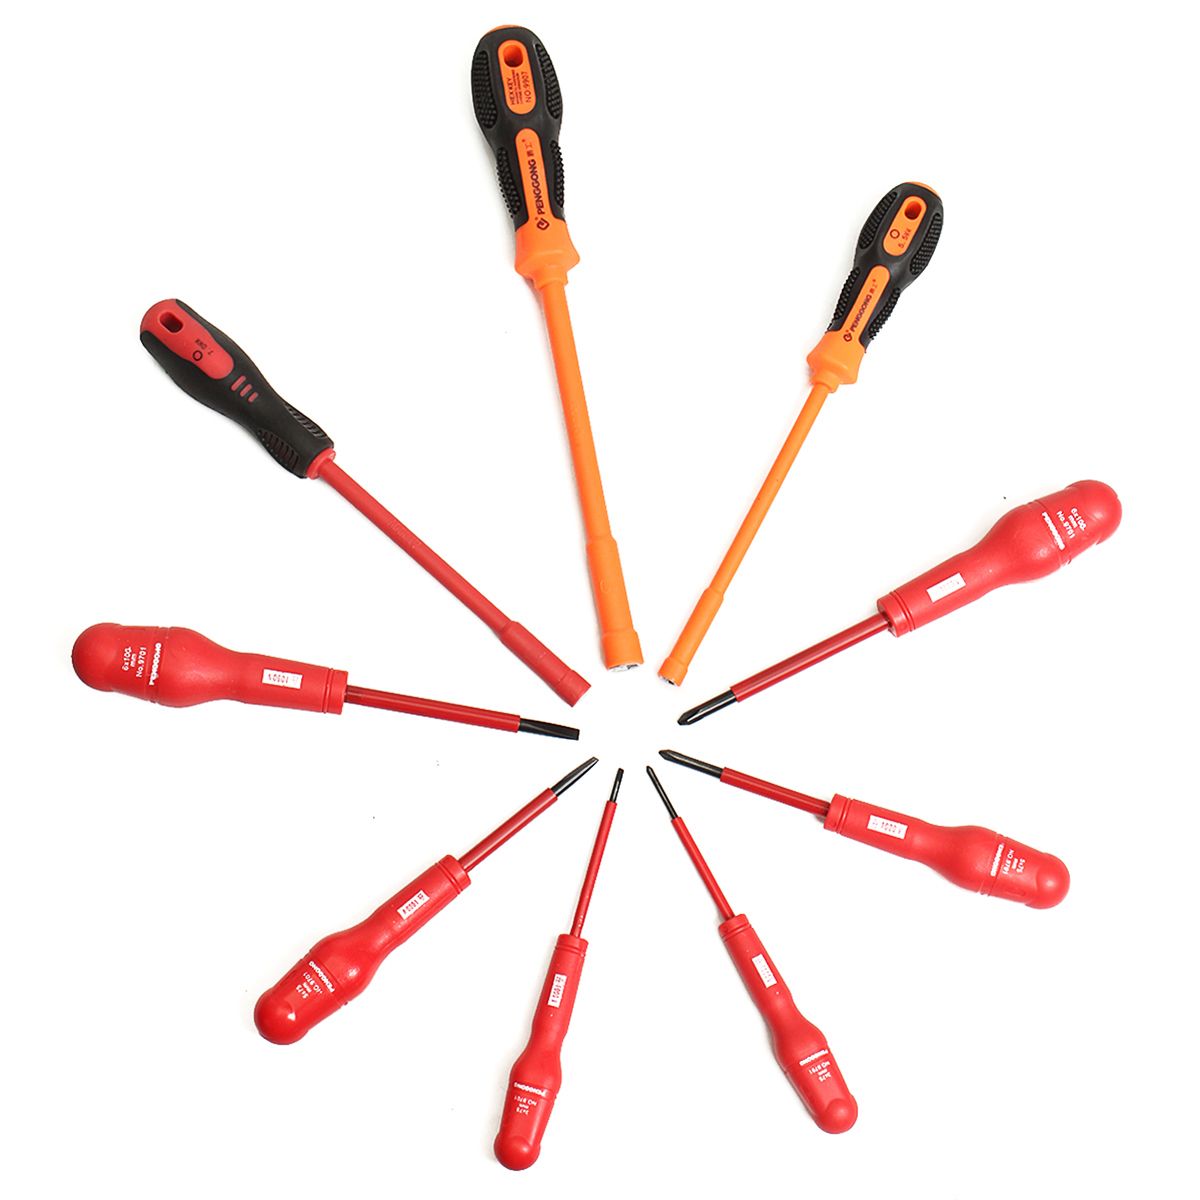 Insulated-Electrical-Screwdriver-Set-9PCS-Insulated-Magnetic-Tipped-Screwdrivers-Repair-Tool-Kit-1295176